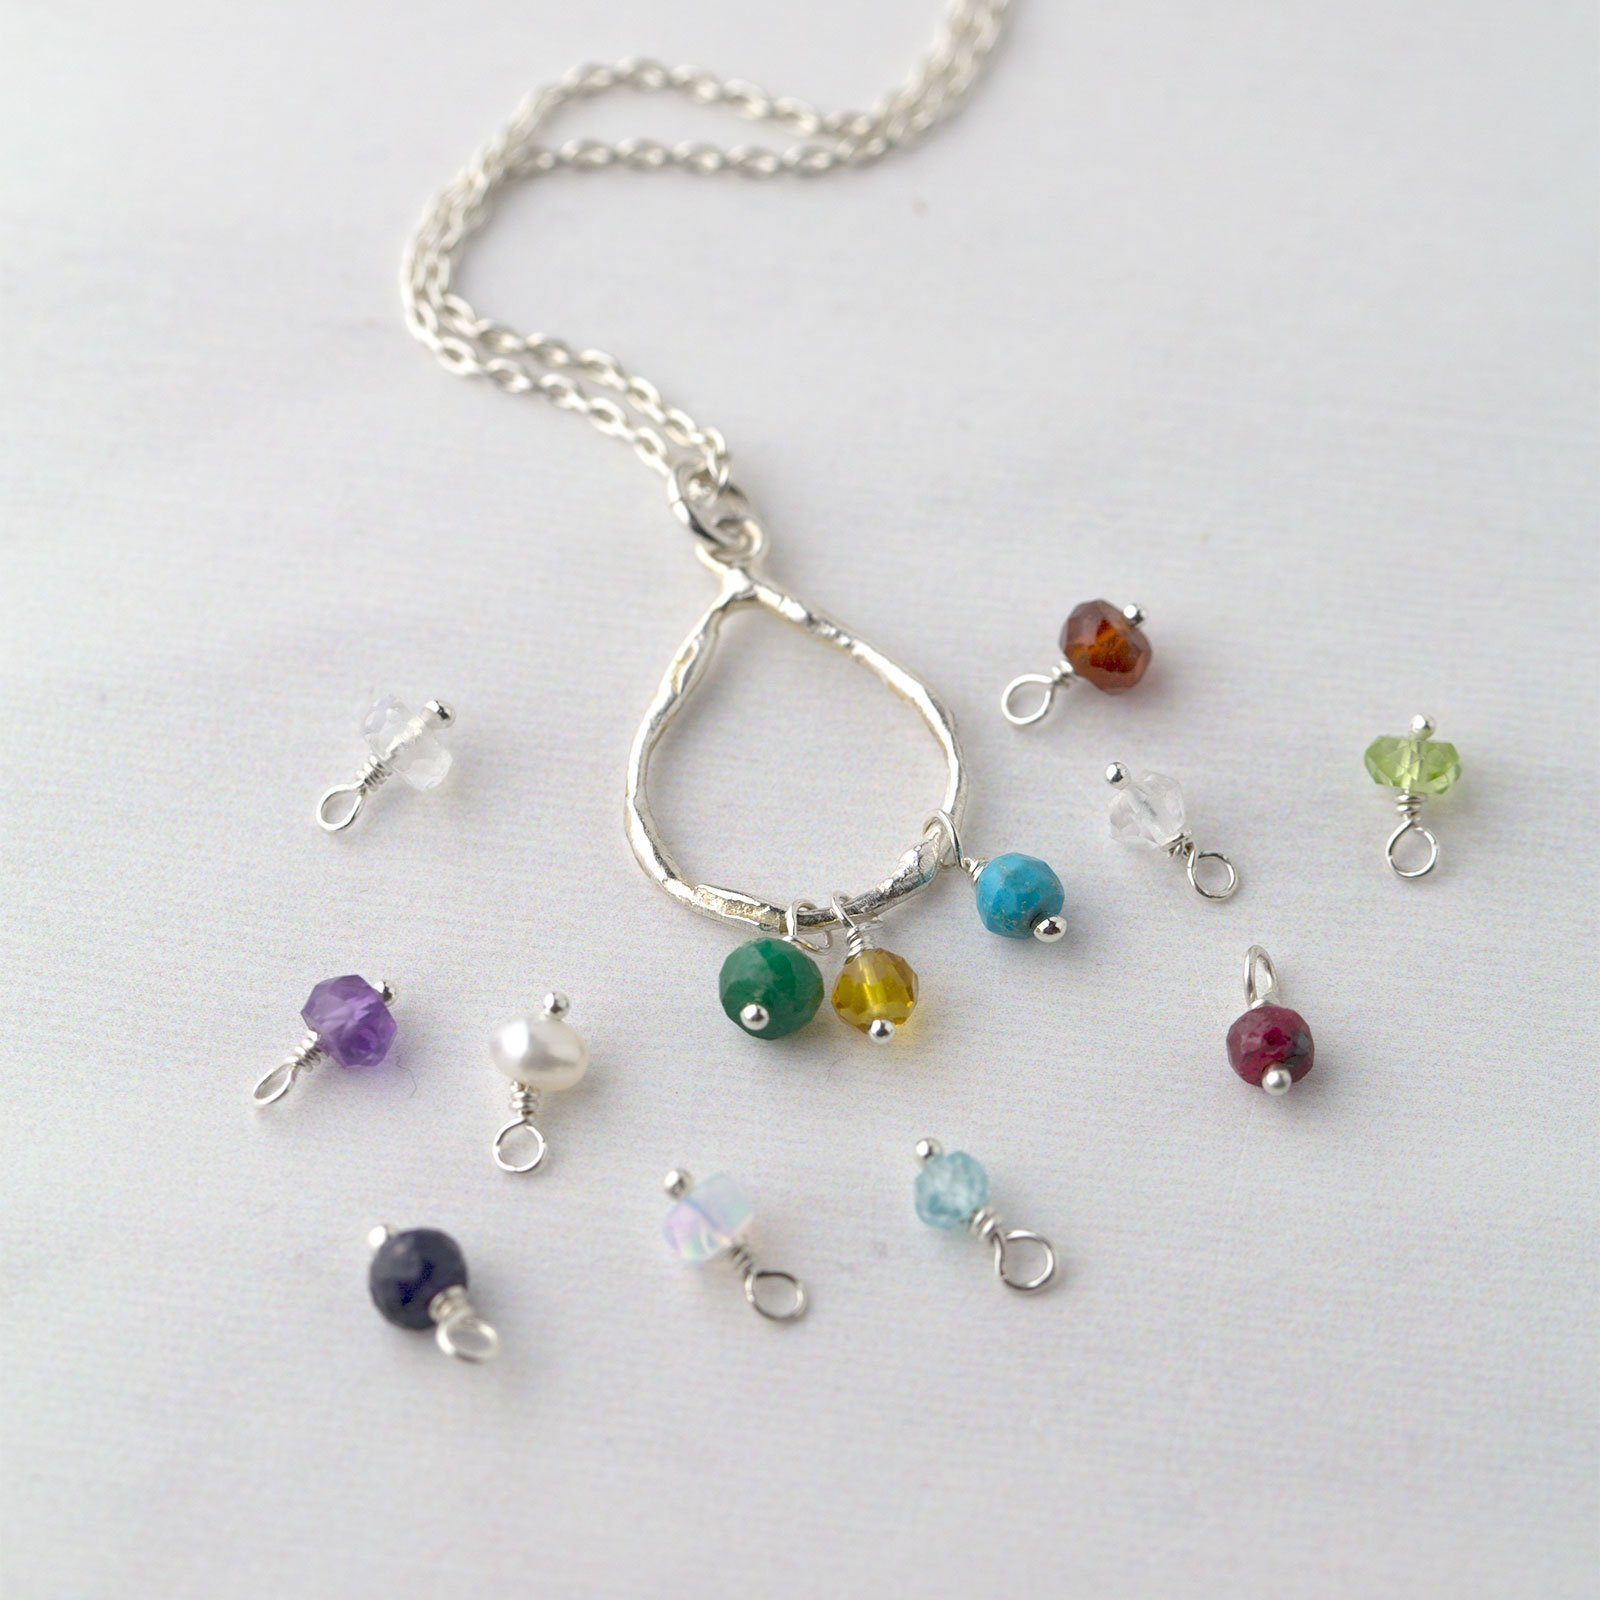 Birthstone Teardrop Necklace - 1 or More Stones - Handmade Jewelry by Burnish